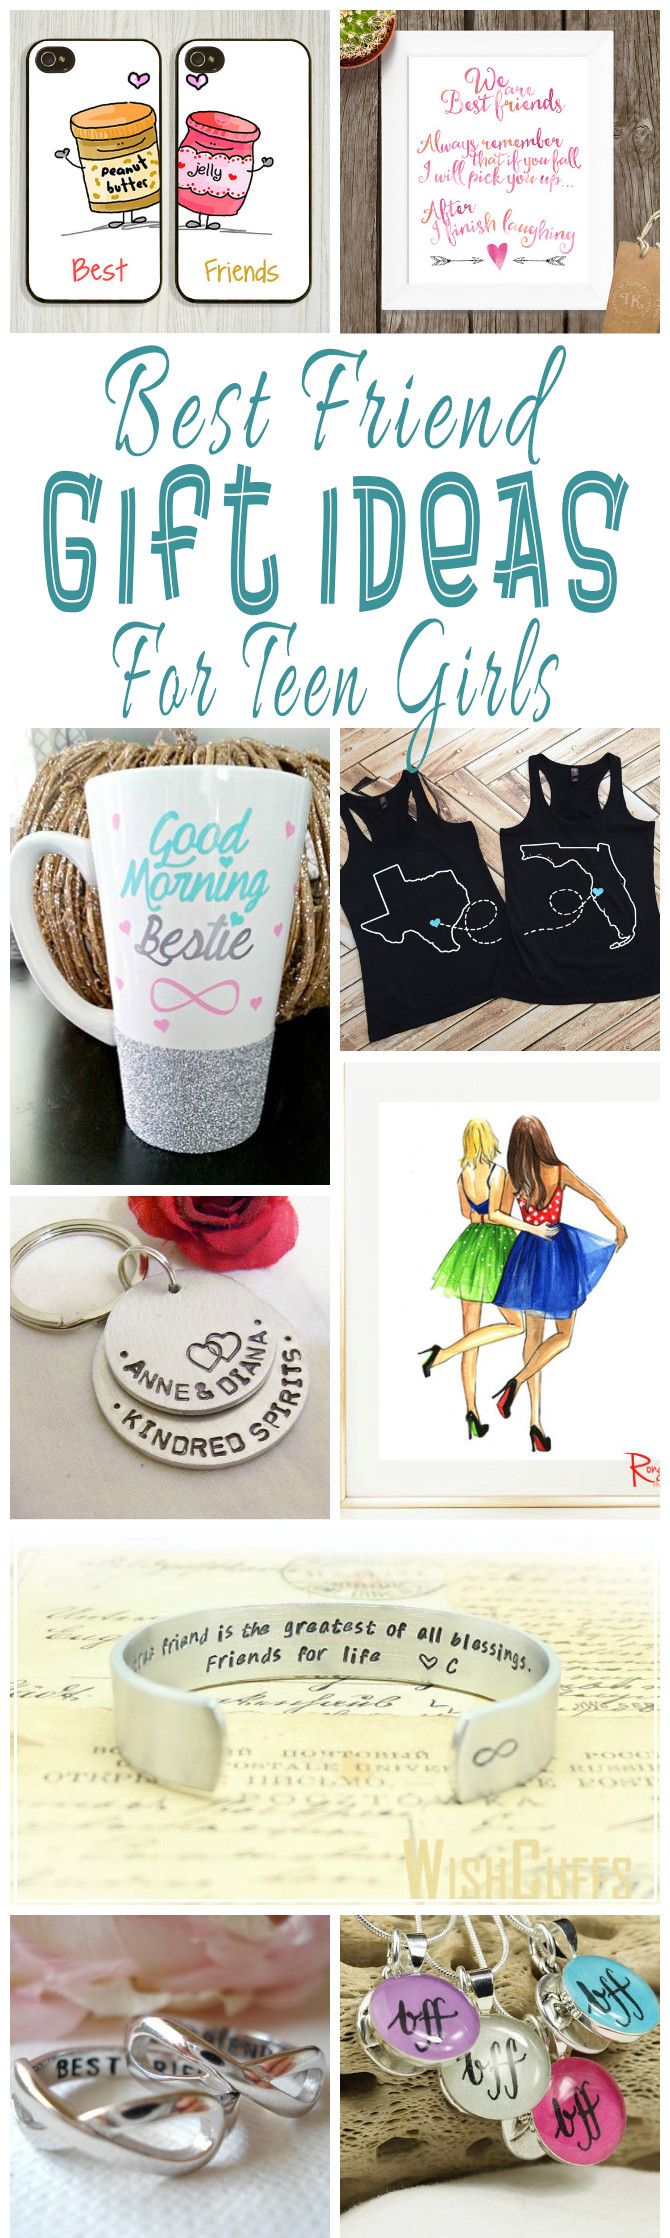 Birthday Gift Ideas For Teens
 Best Friend Gift Ideas For Teens